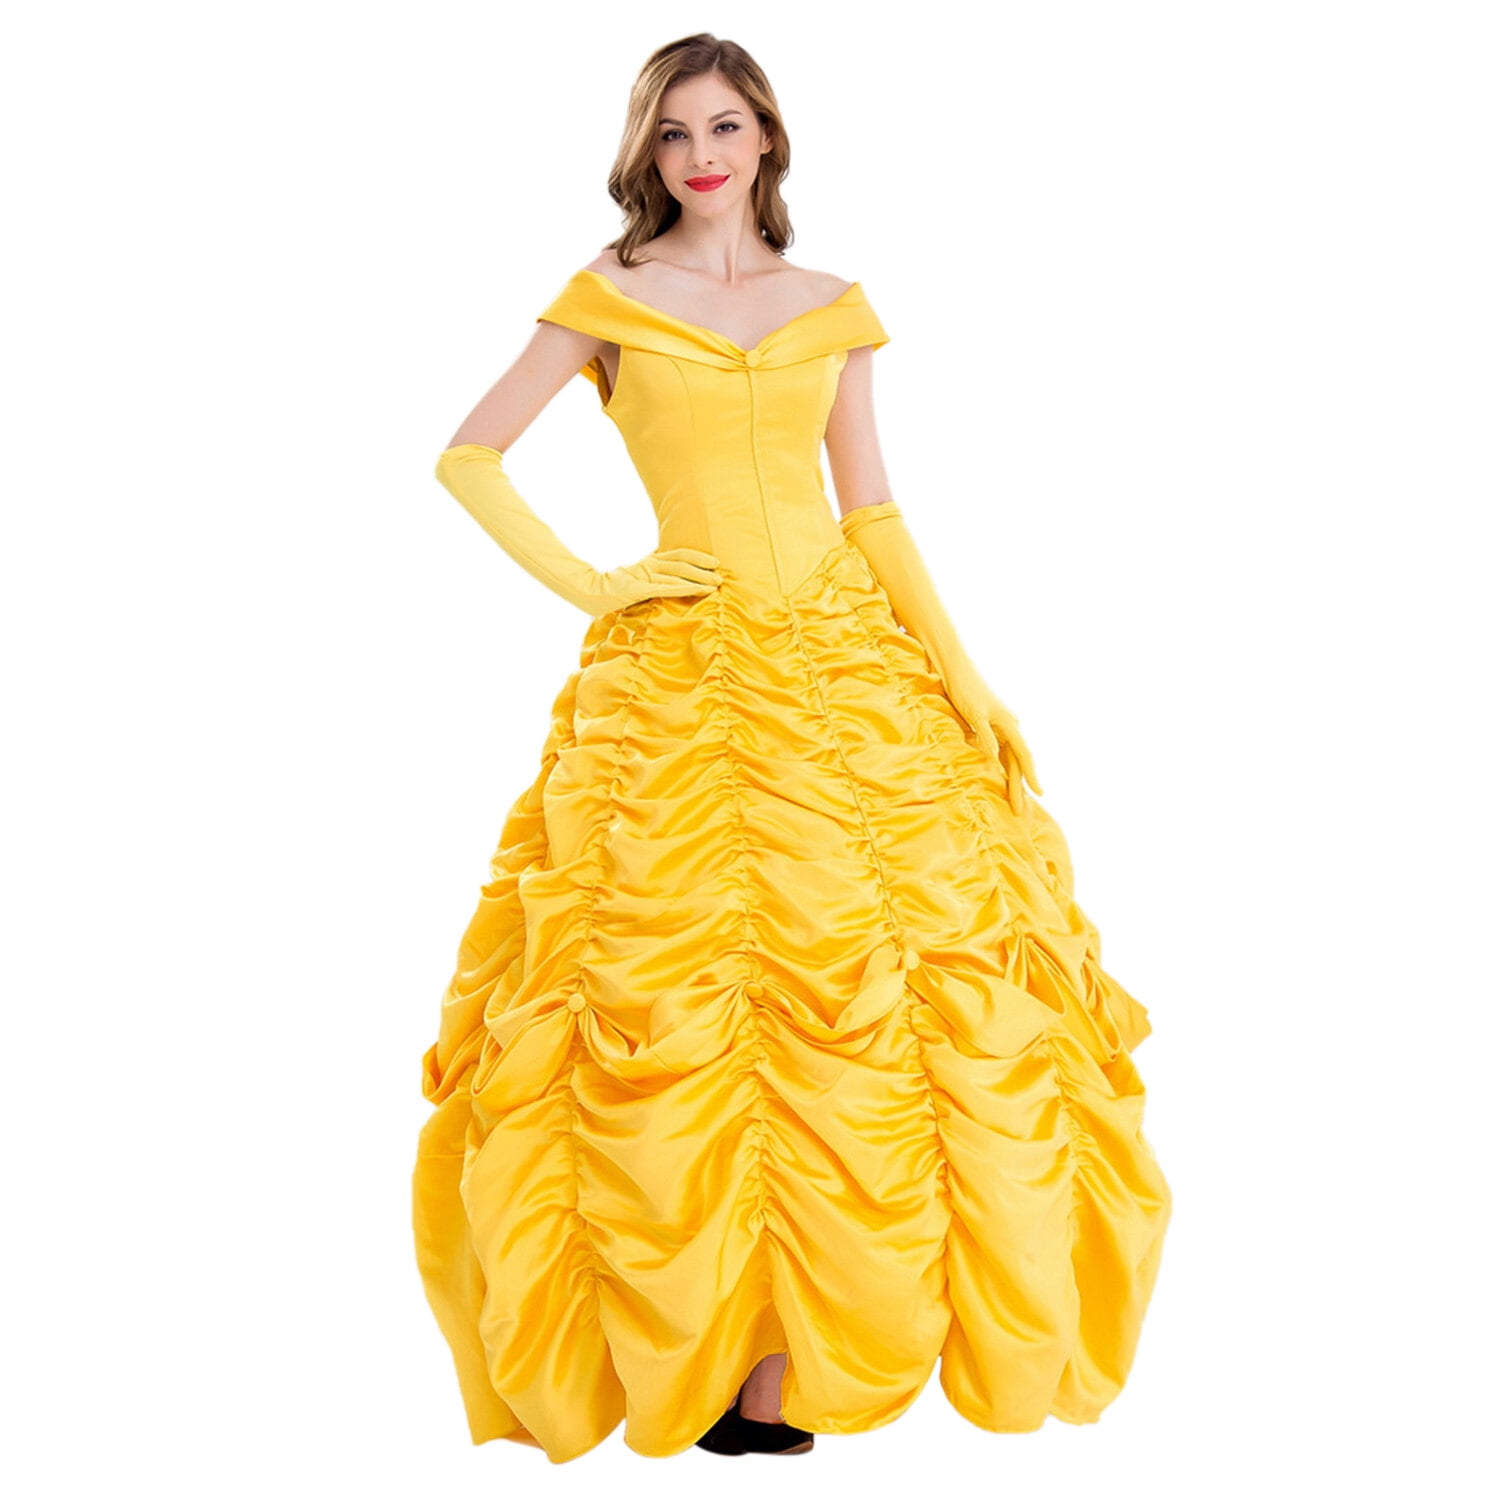 HAWEE Women's Princess Belle Costume Halloween Party Yellow Dress with ...